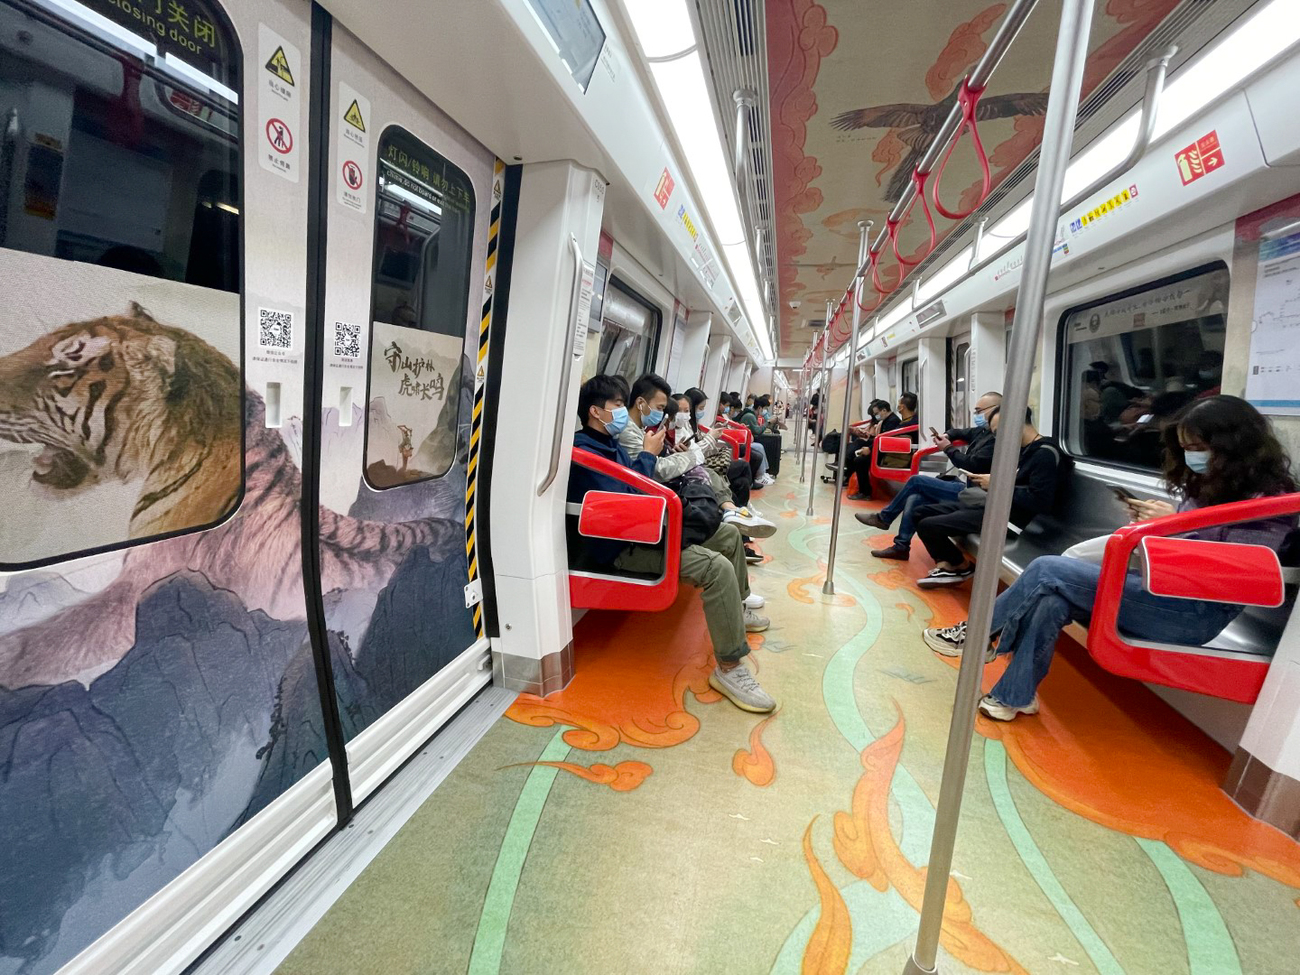 Subway in China with IFAW designs for PSA against wildlife crime